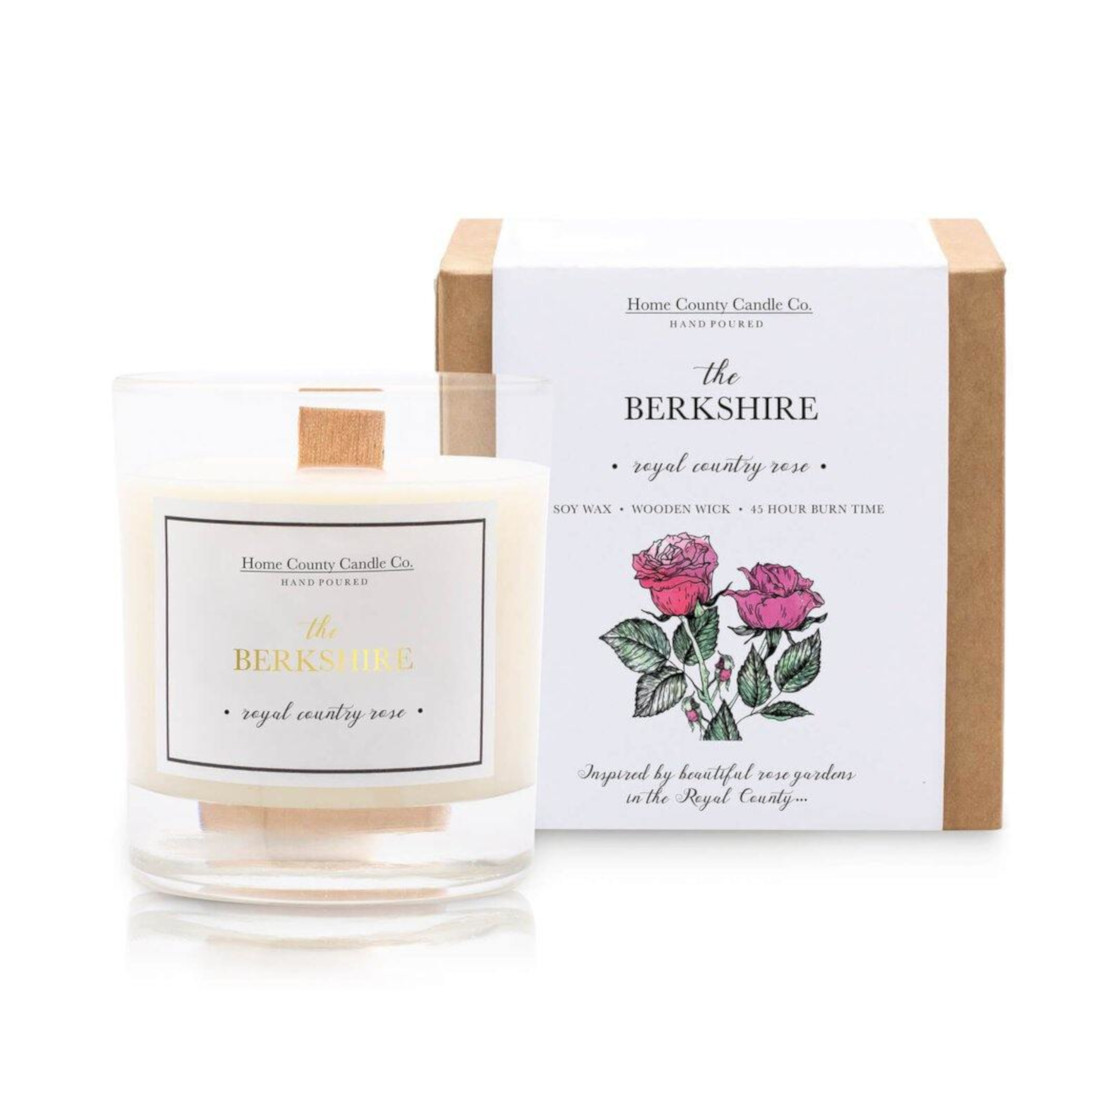 Home County Candle Berkshire 200g Soy Candle